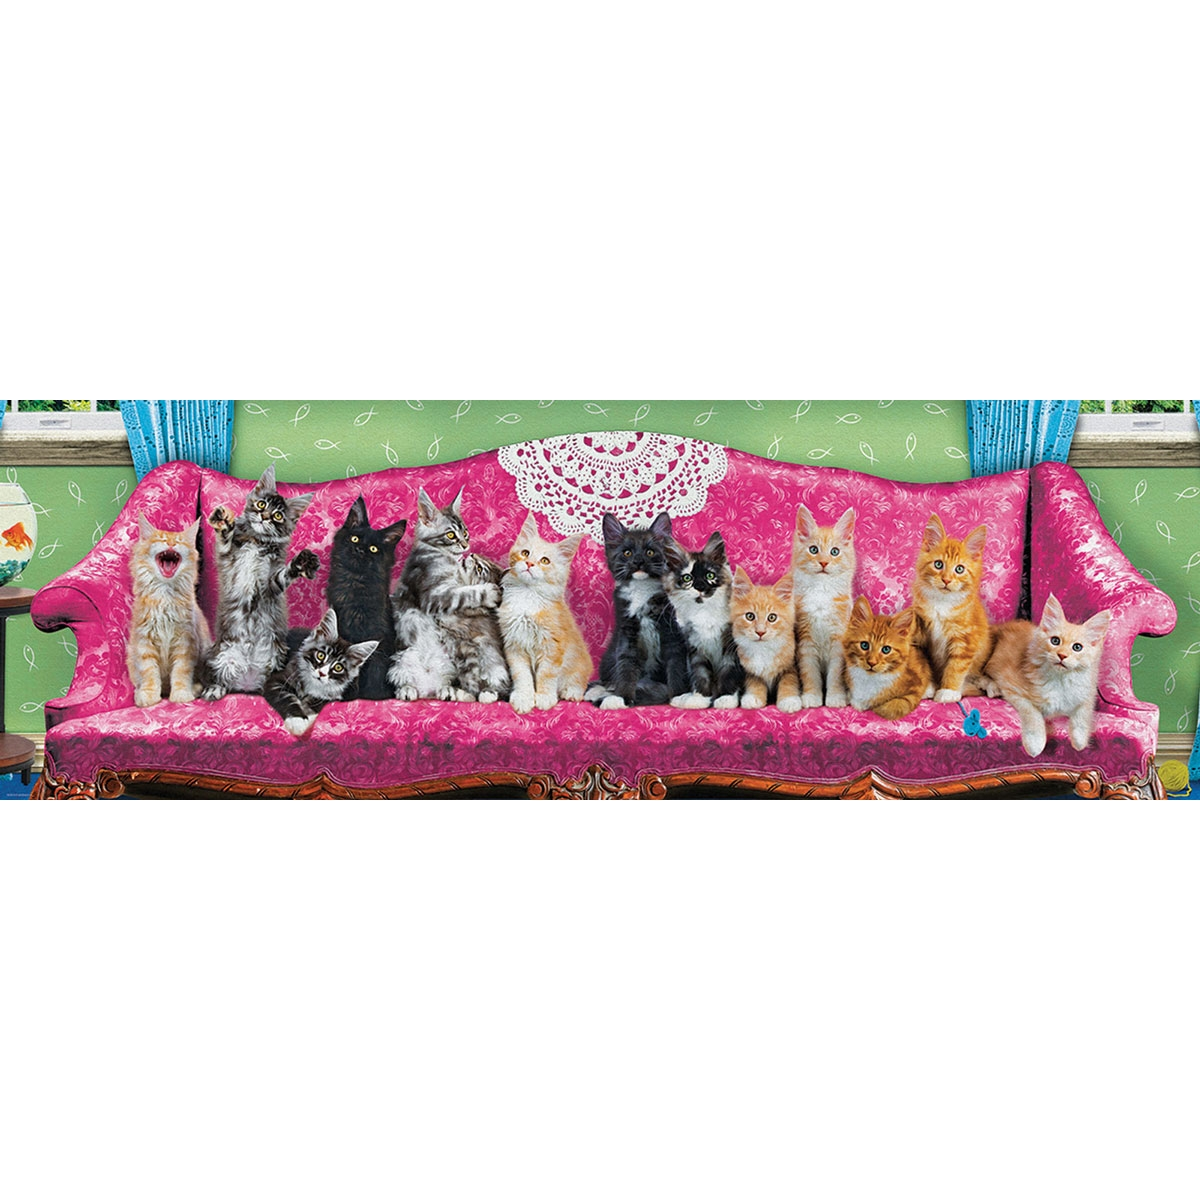 EUROGRAPHICS Panoramapuzzle Couch Teile Cat 1000 - Puzzle Kitty